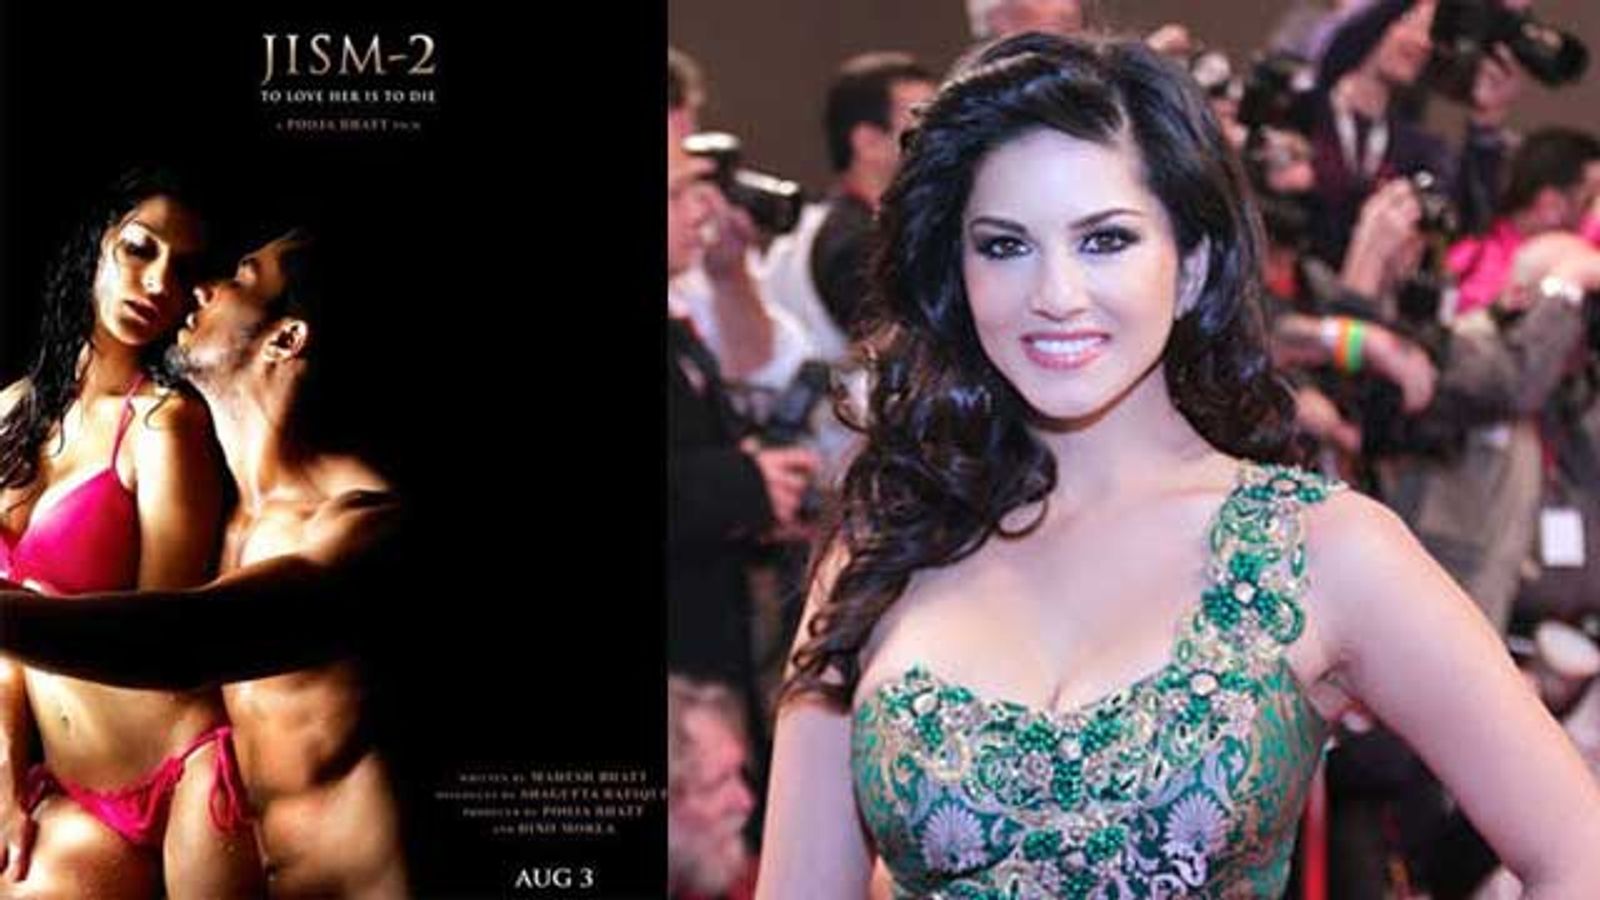 andy sikes recommends sunny leone jism 2 pic